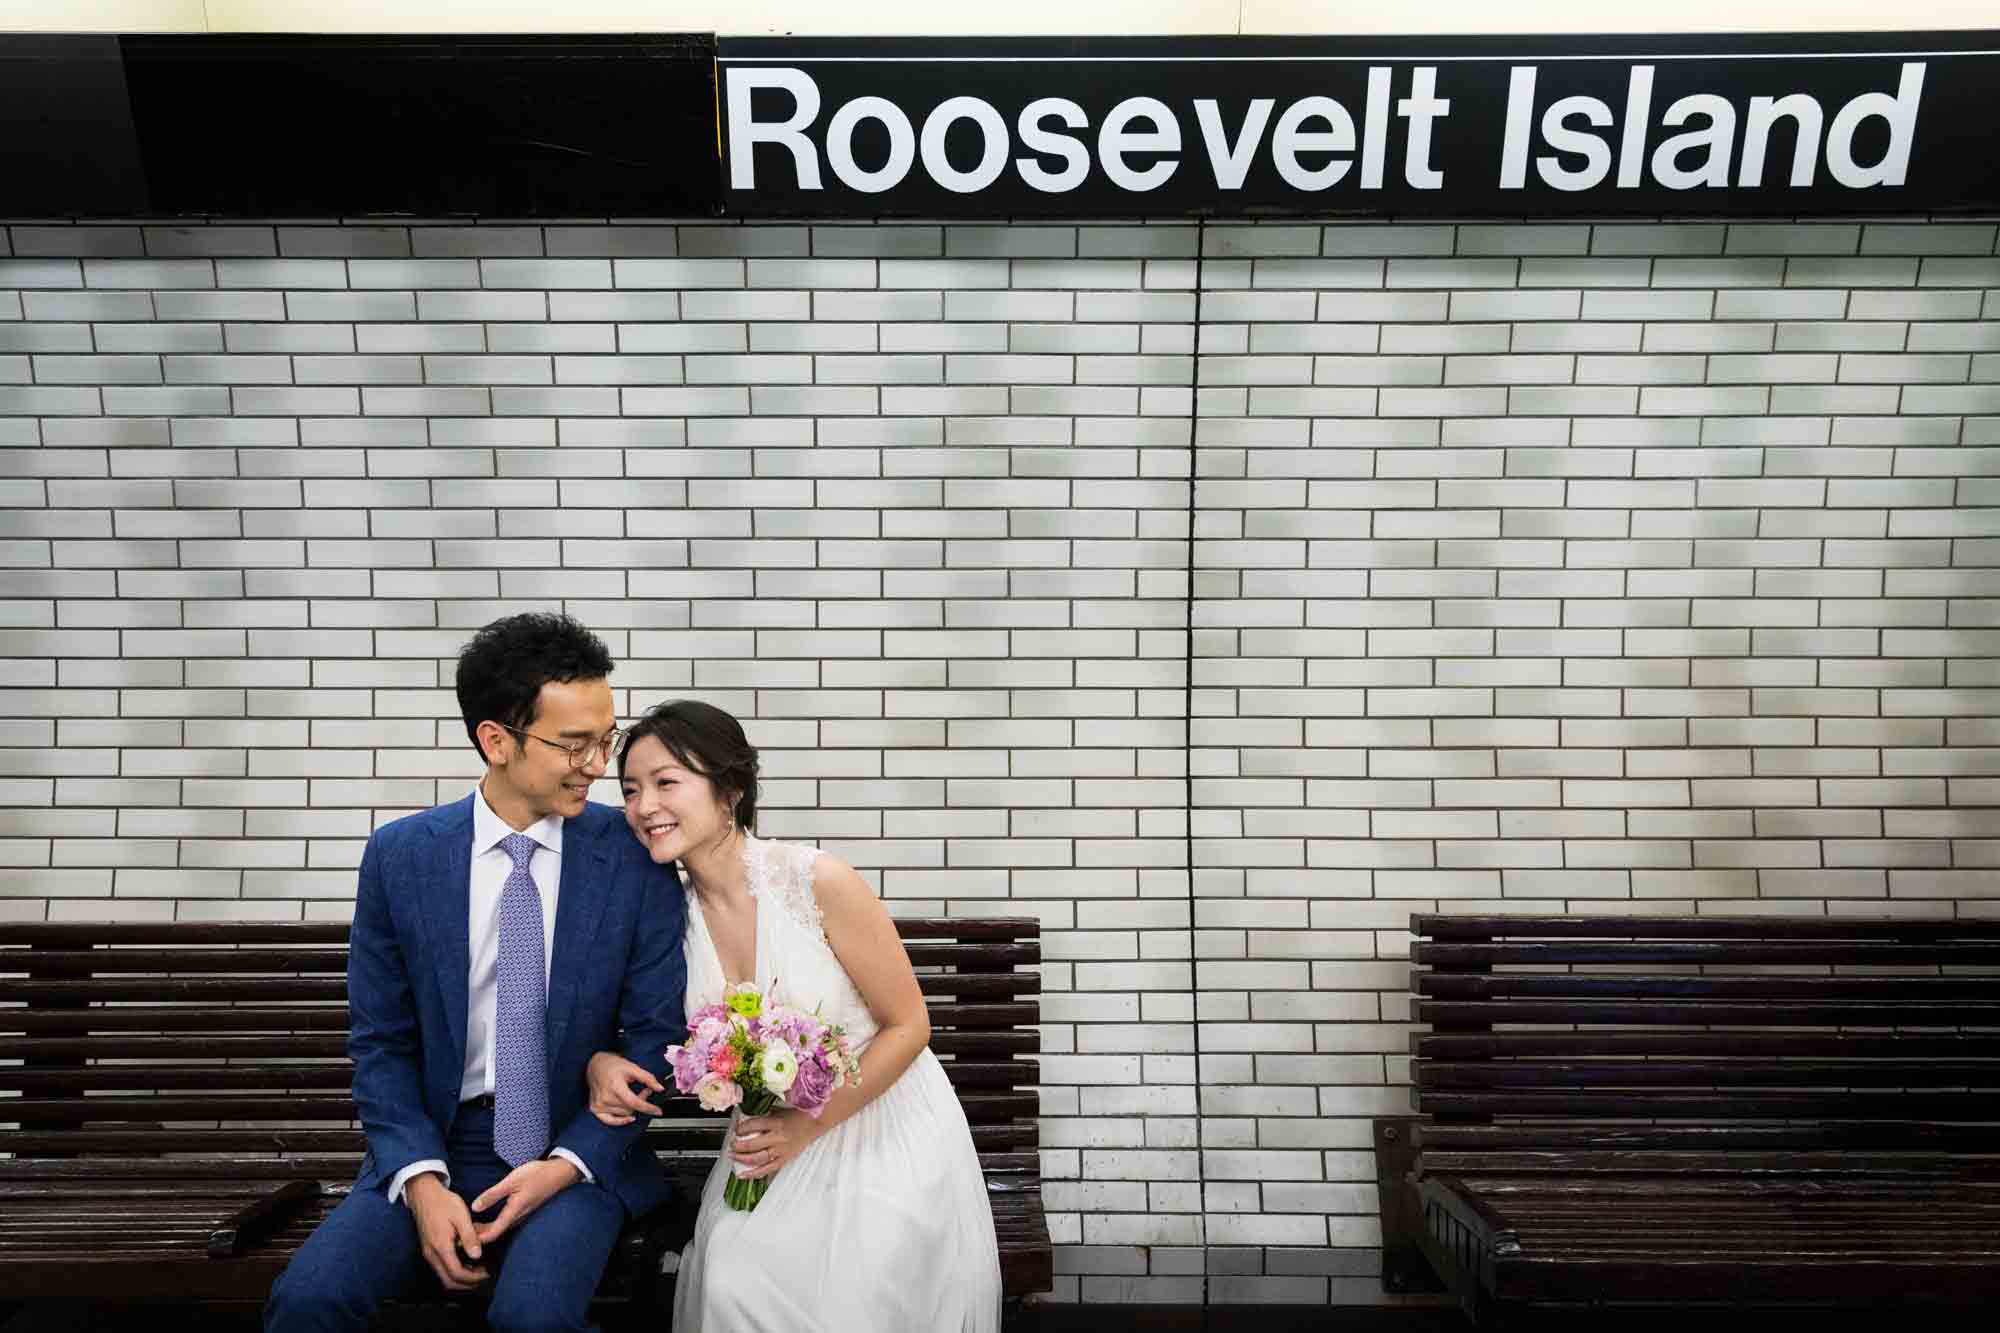 Couple sitting on bench in subway station under Roosevelt Island sign during a Roosevelt Island engagement photo shoot